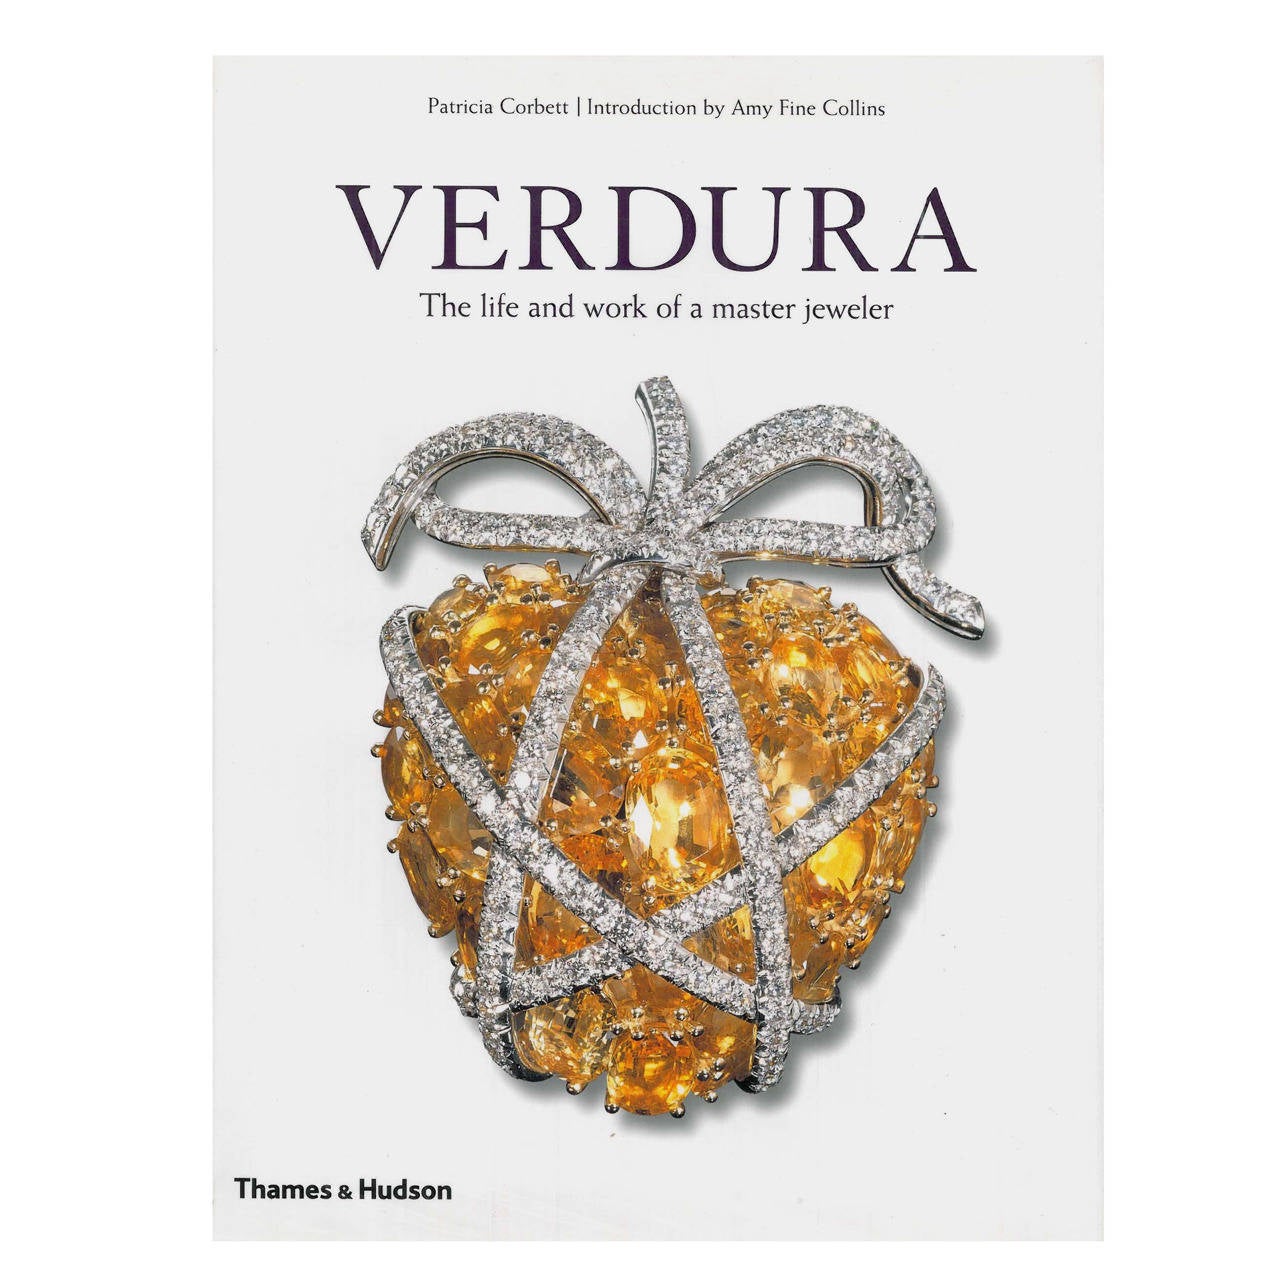 Book of "VERDURA - The Life and Work of a Master Jeweler"